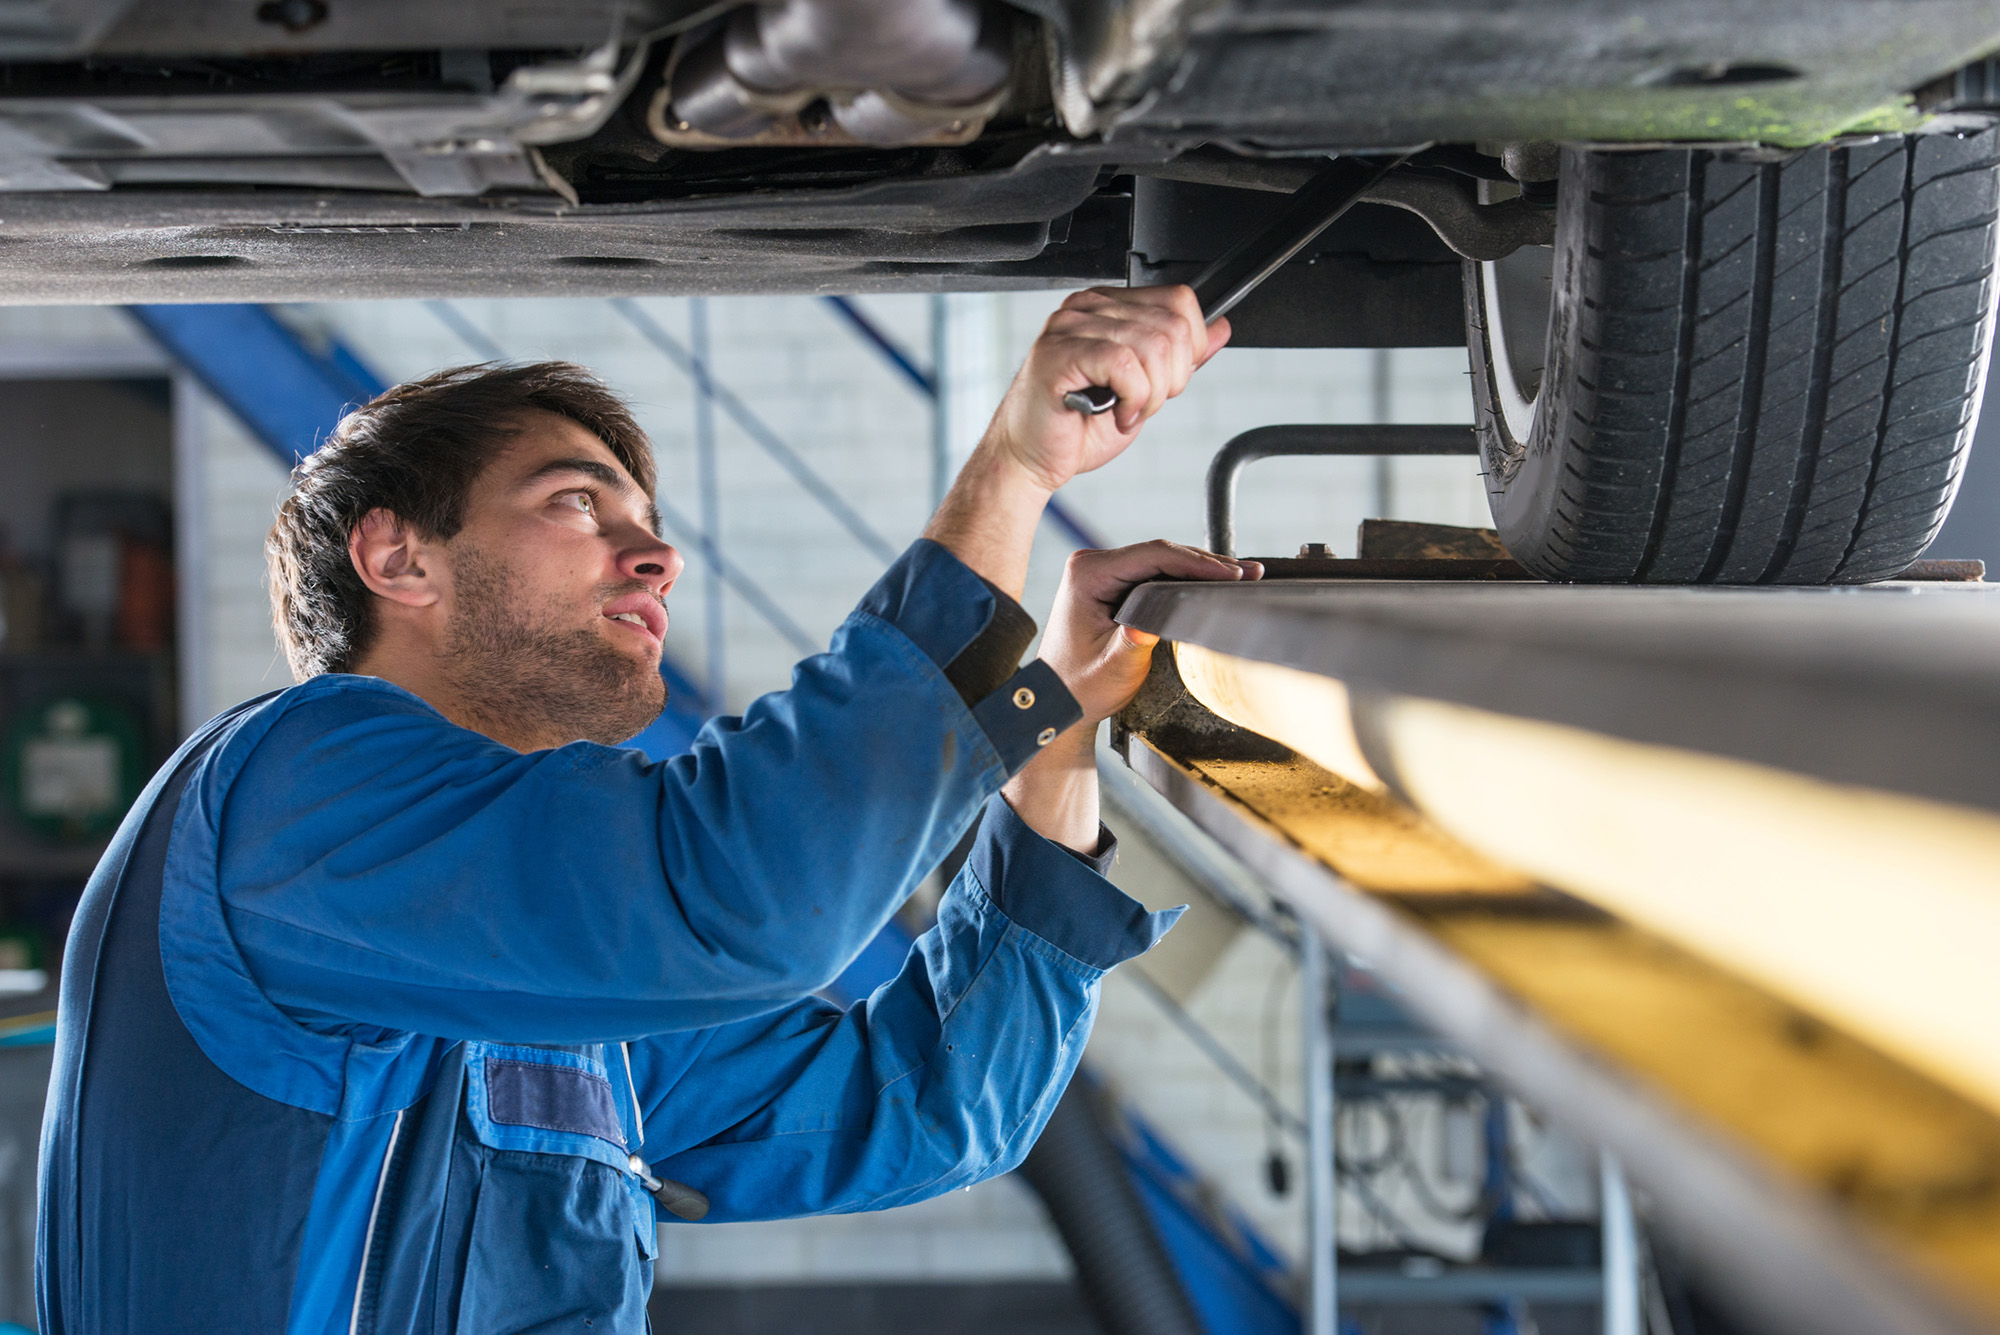 Mechanic, examining the suspension of a vehicle with a steel rod for any undesired clearances as part of a periodical vehicle safety inspection or mot test